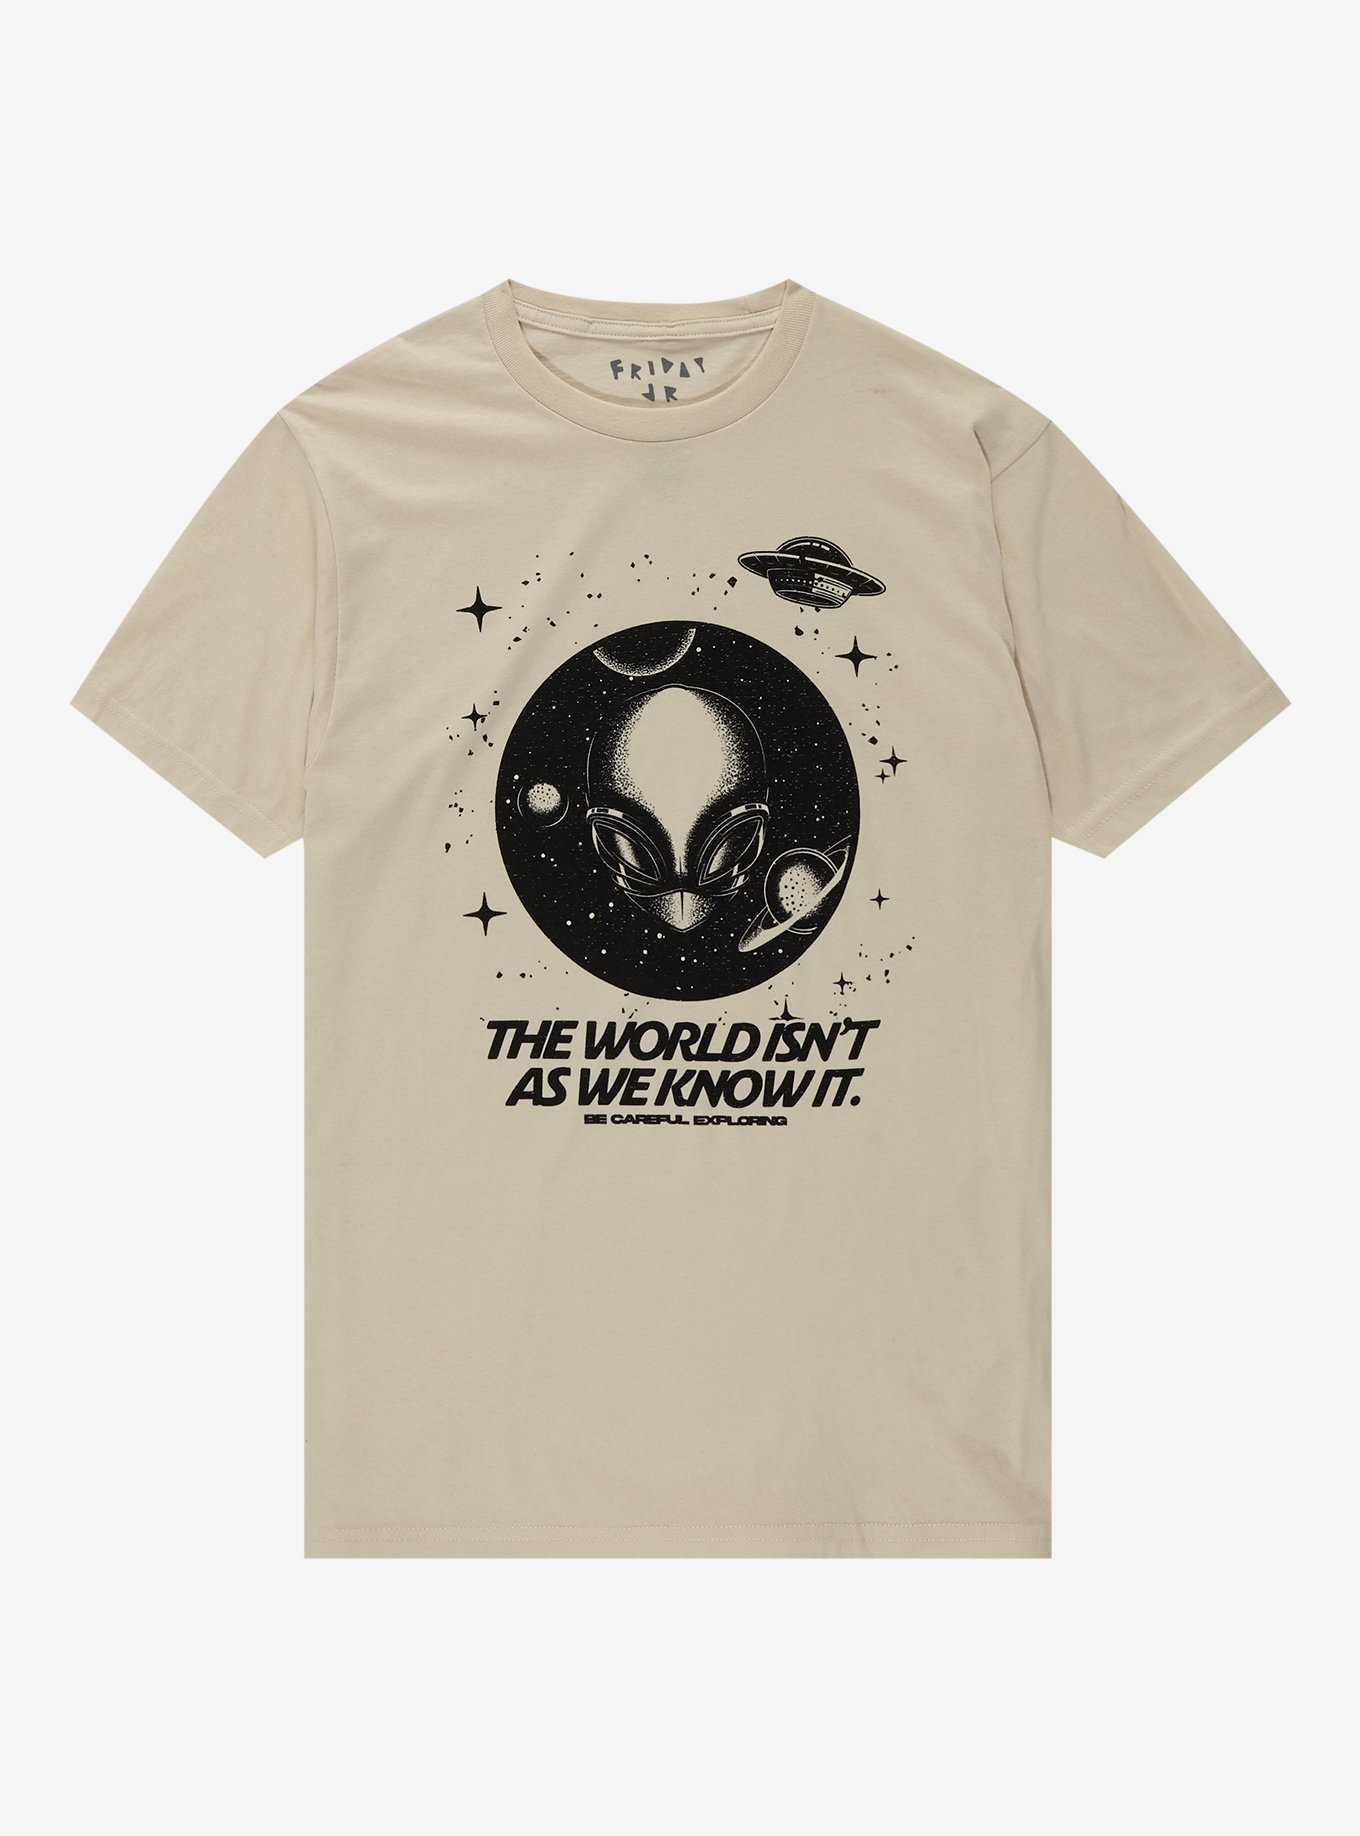 Alien World Isn't As We Know It T-Shirt By Friday Jr., , hi-res